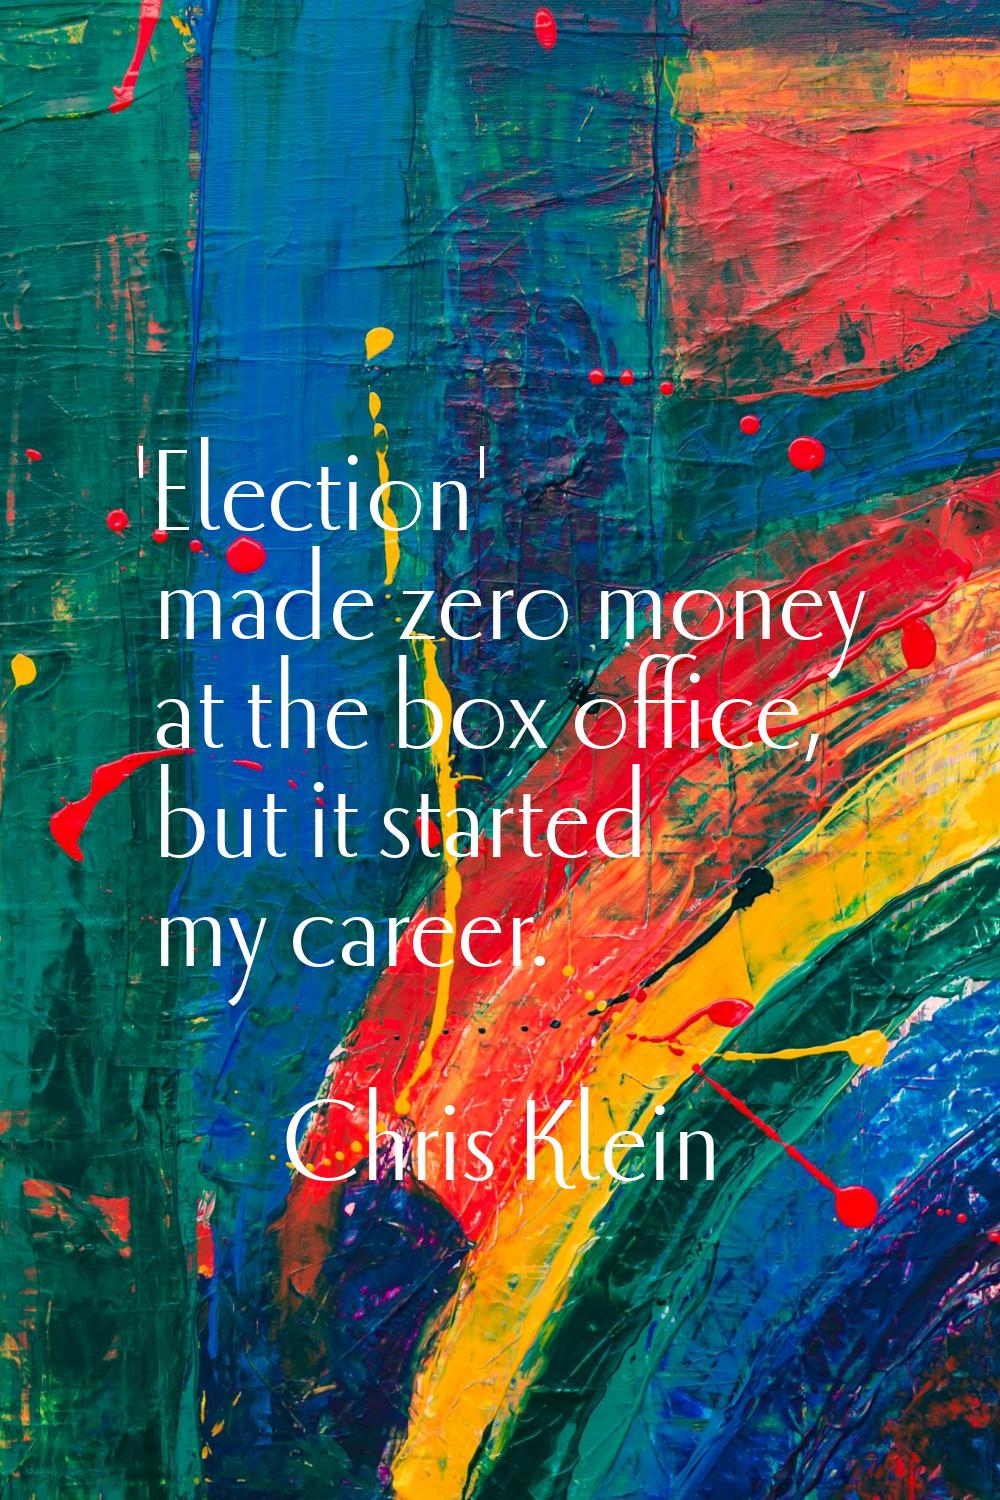 'Election' made zero money at the box office, but it started my career.